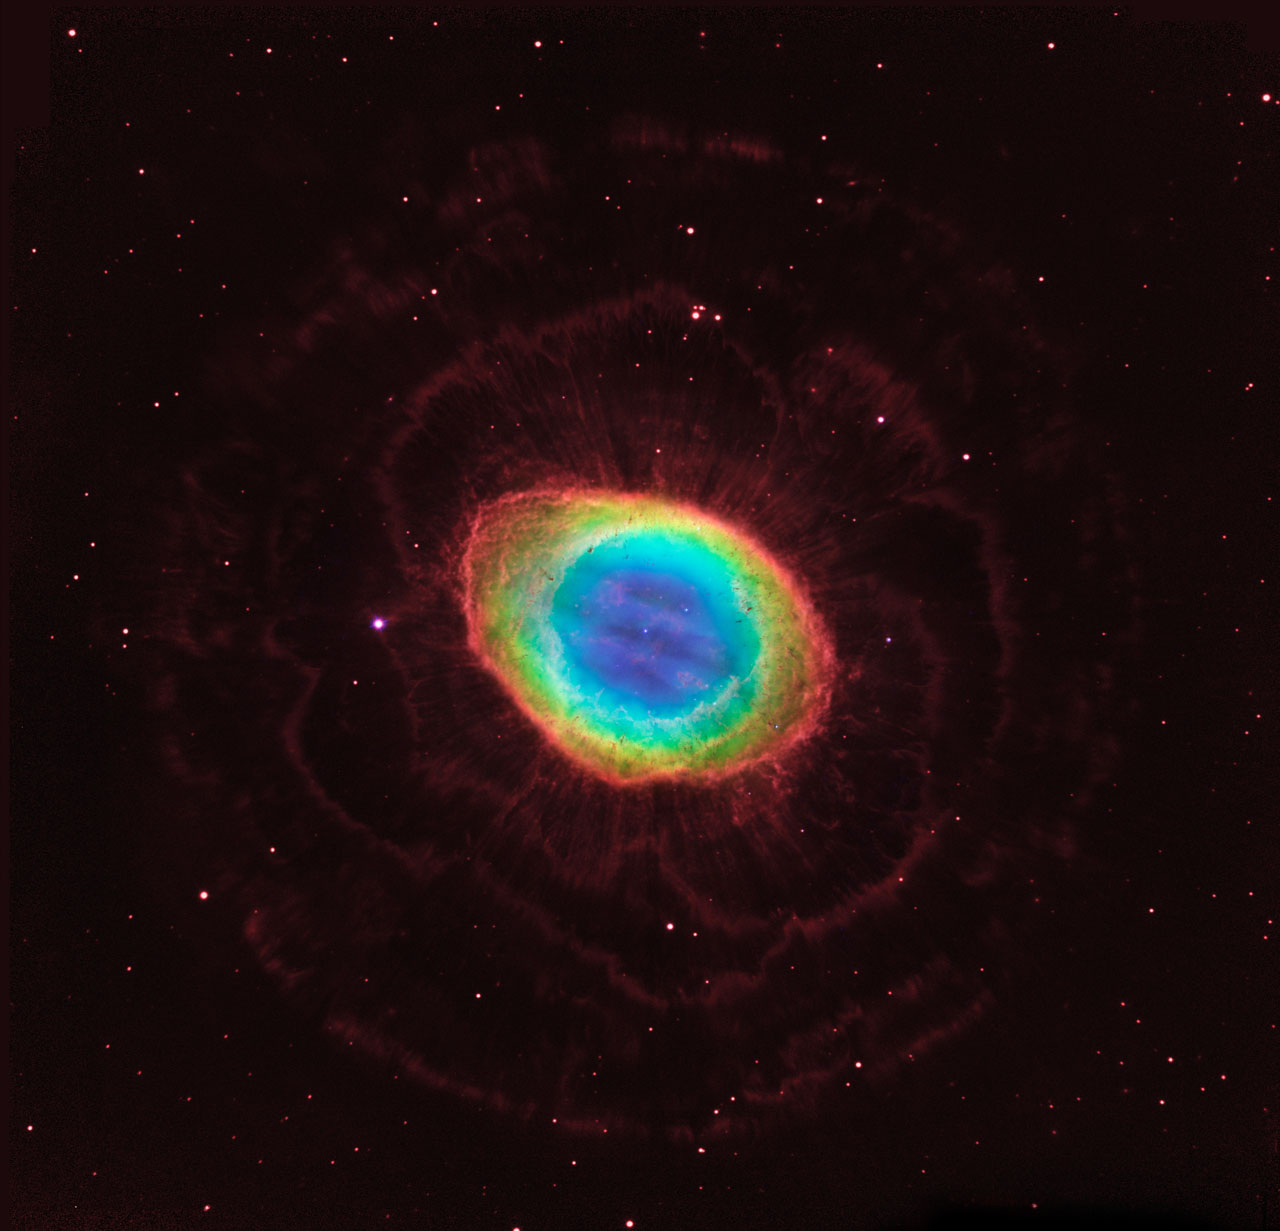 Big Pic: Hubble Space Telescope Captures The Ring Nebula In Astonishing Detail